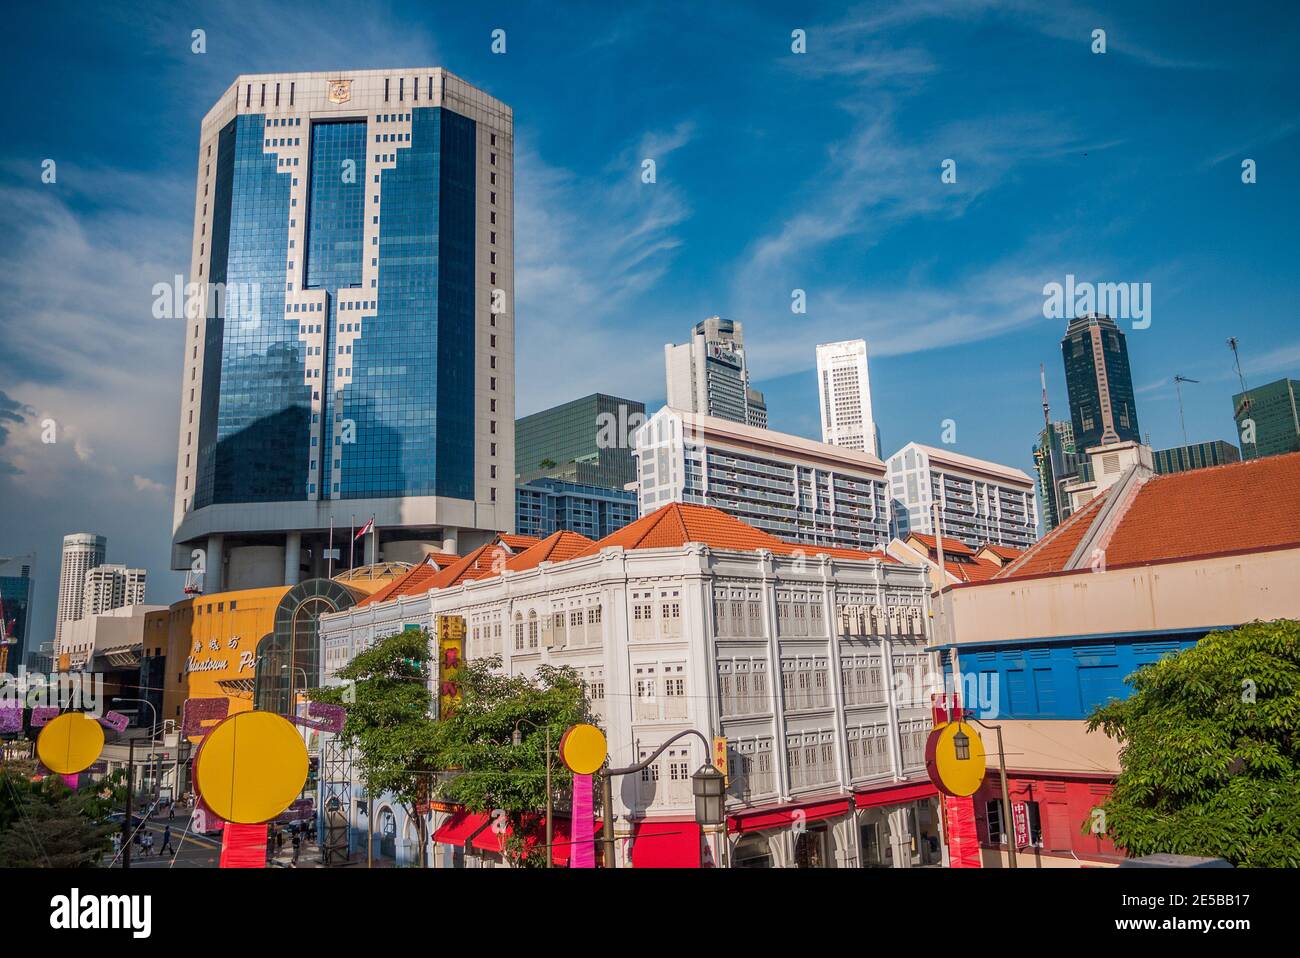 Singapore is a sovereign island city-state in Southeast Asia, off the Malay Peninsula, founded in 1819 by Sir Stamford Raffles as a trading post. Stock Photo